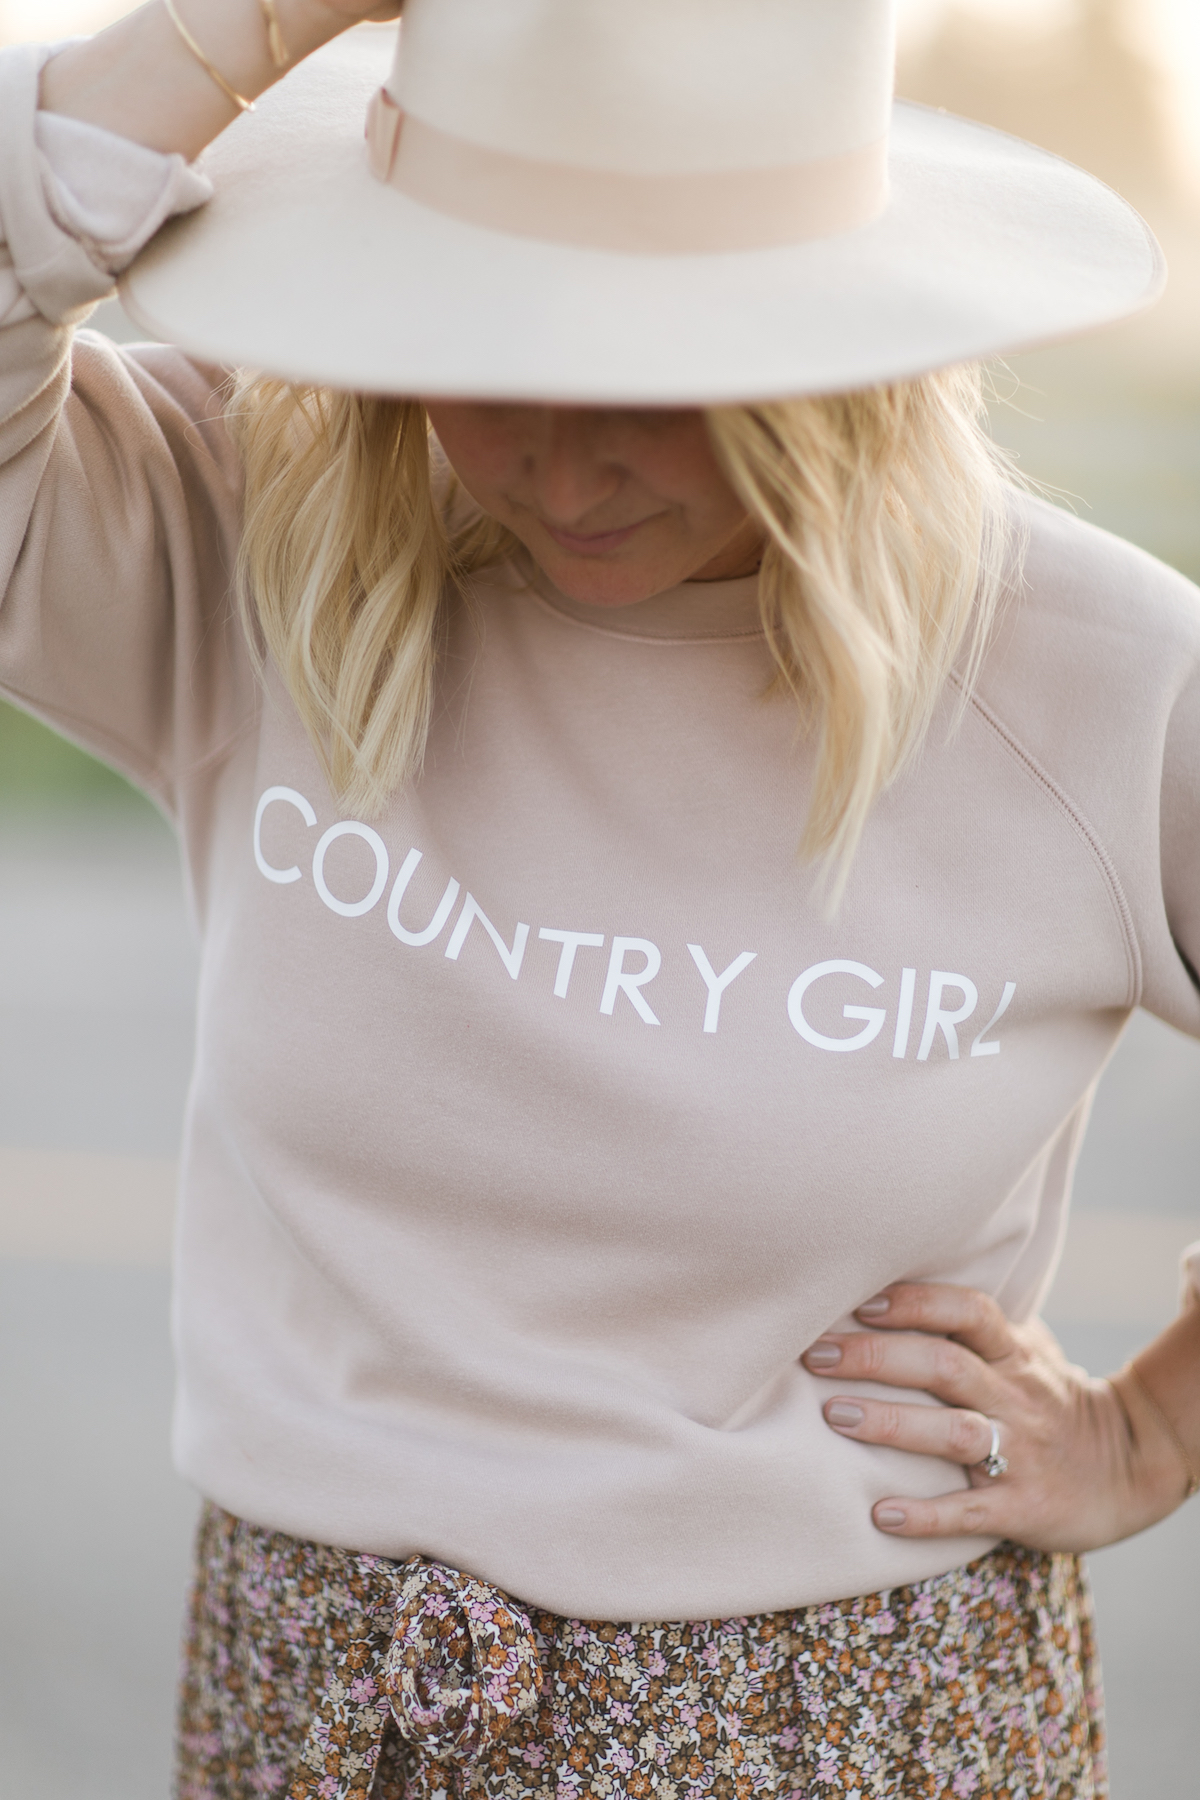 country girl sweaters